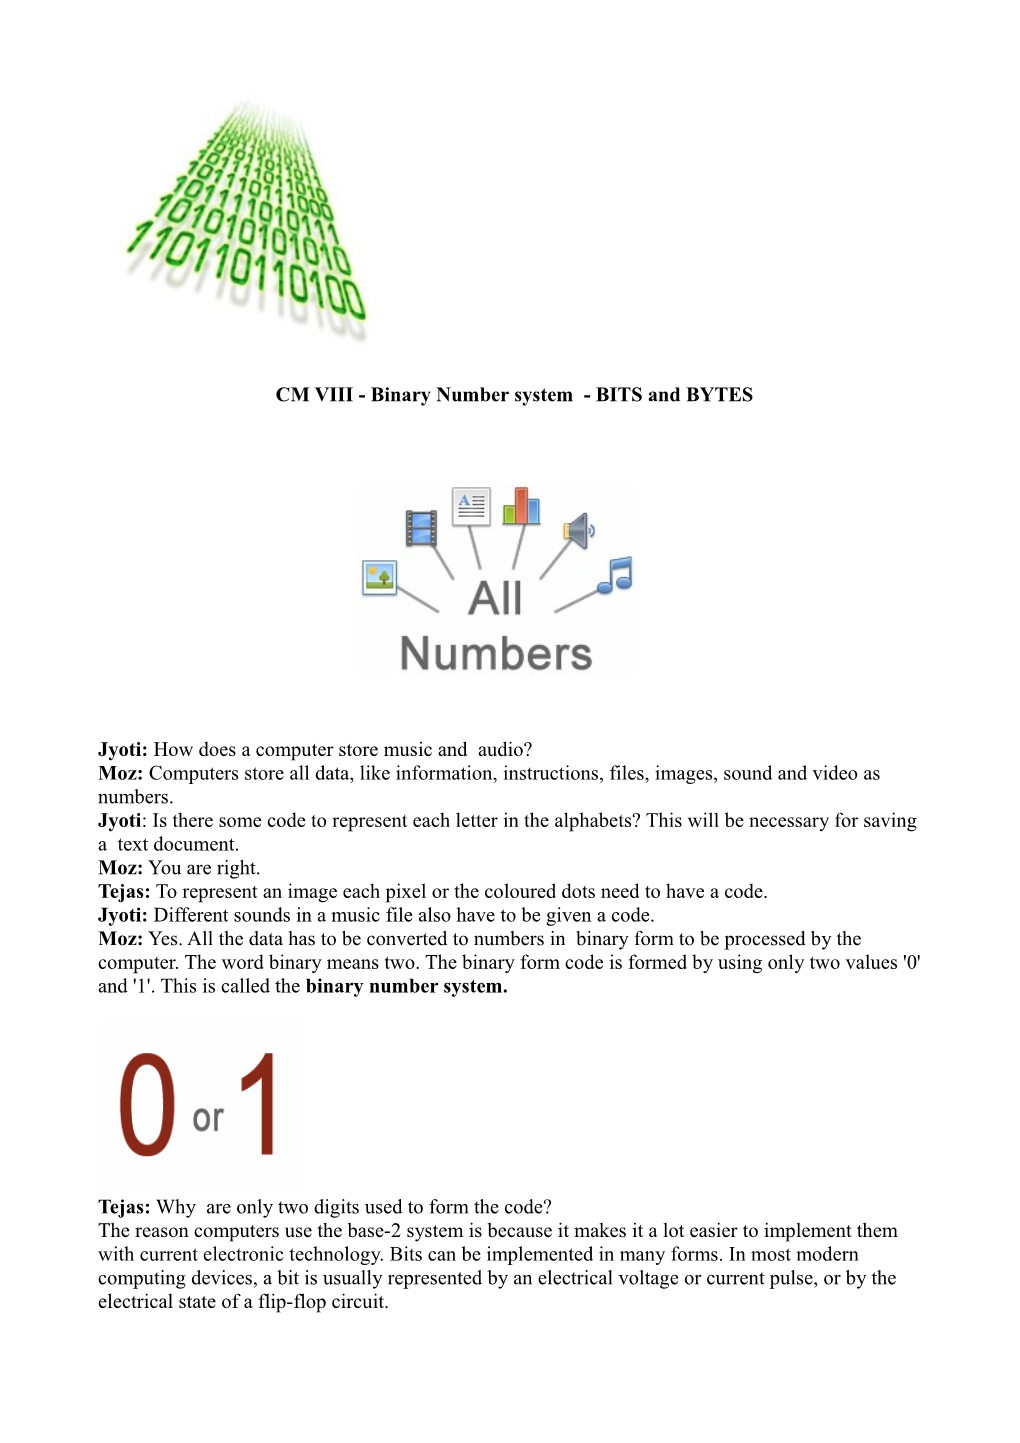 CM VIII - Binary Number System - BITS and BYTES